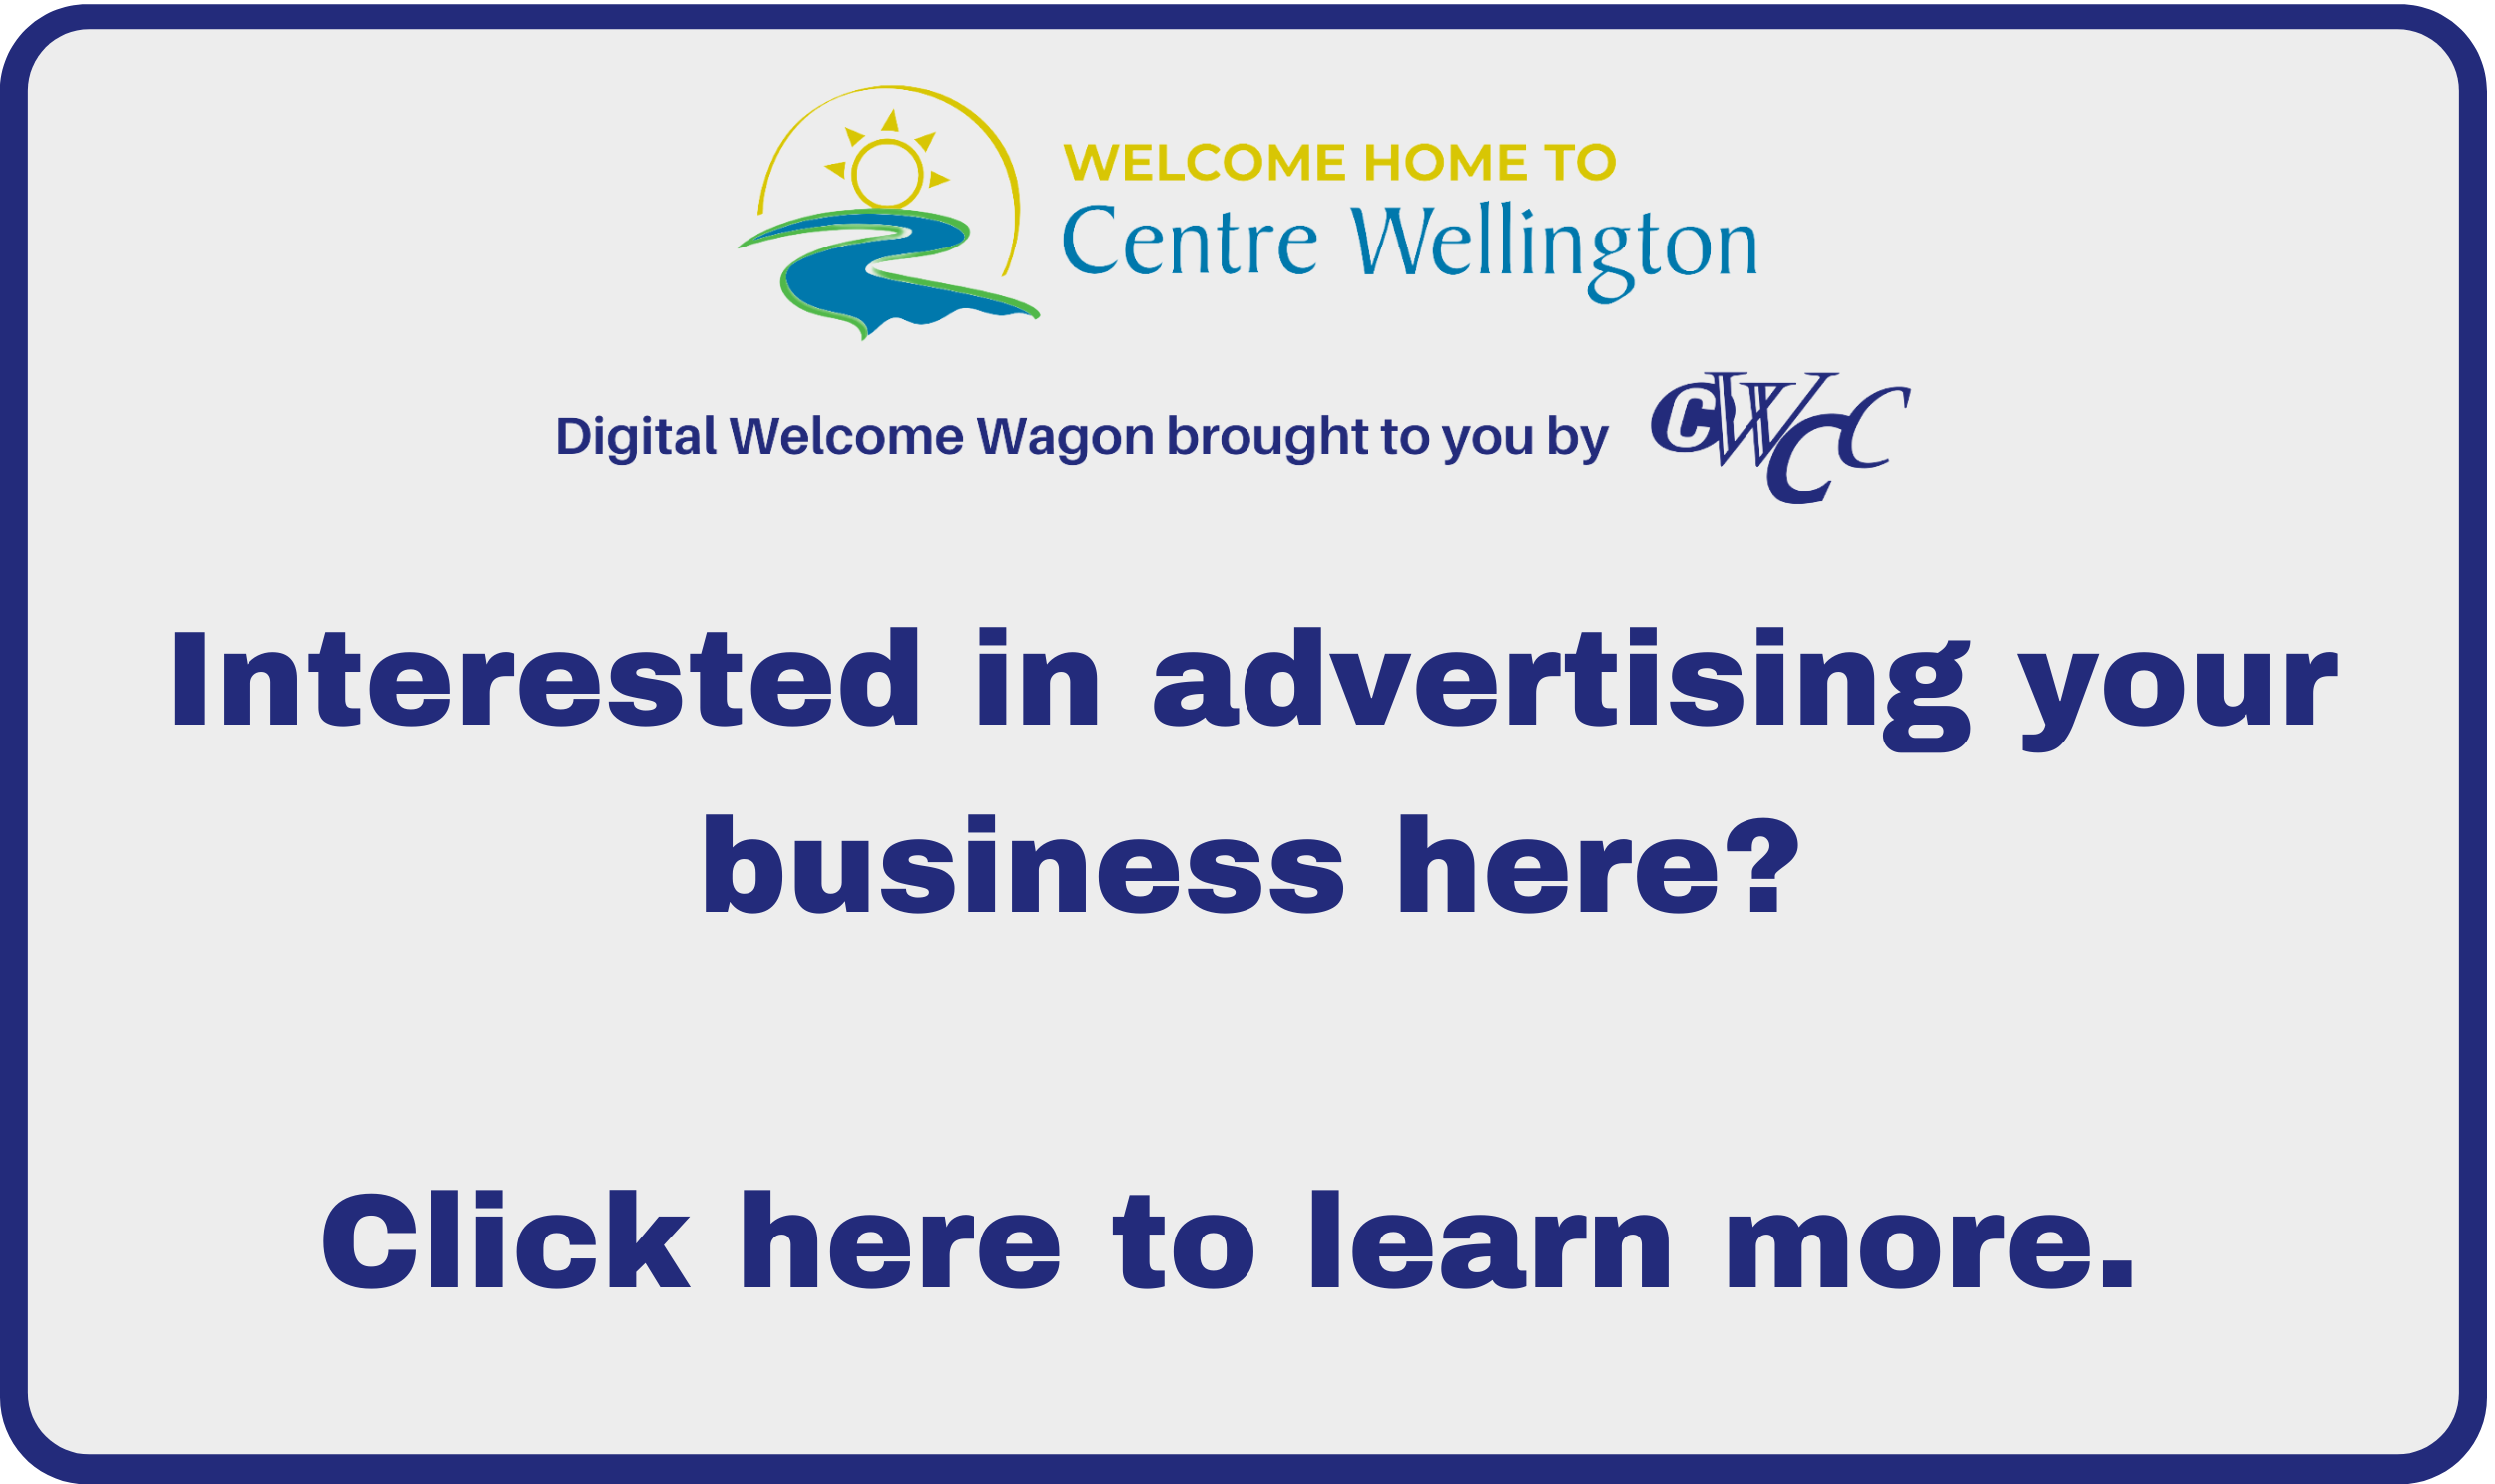 Interested in advertising your business here? Click Me